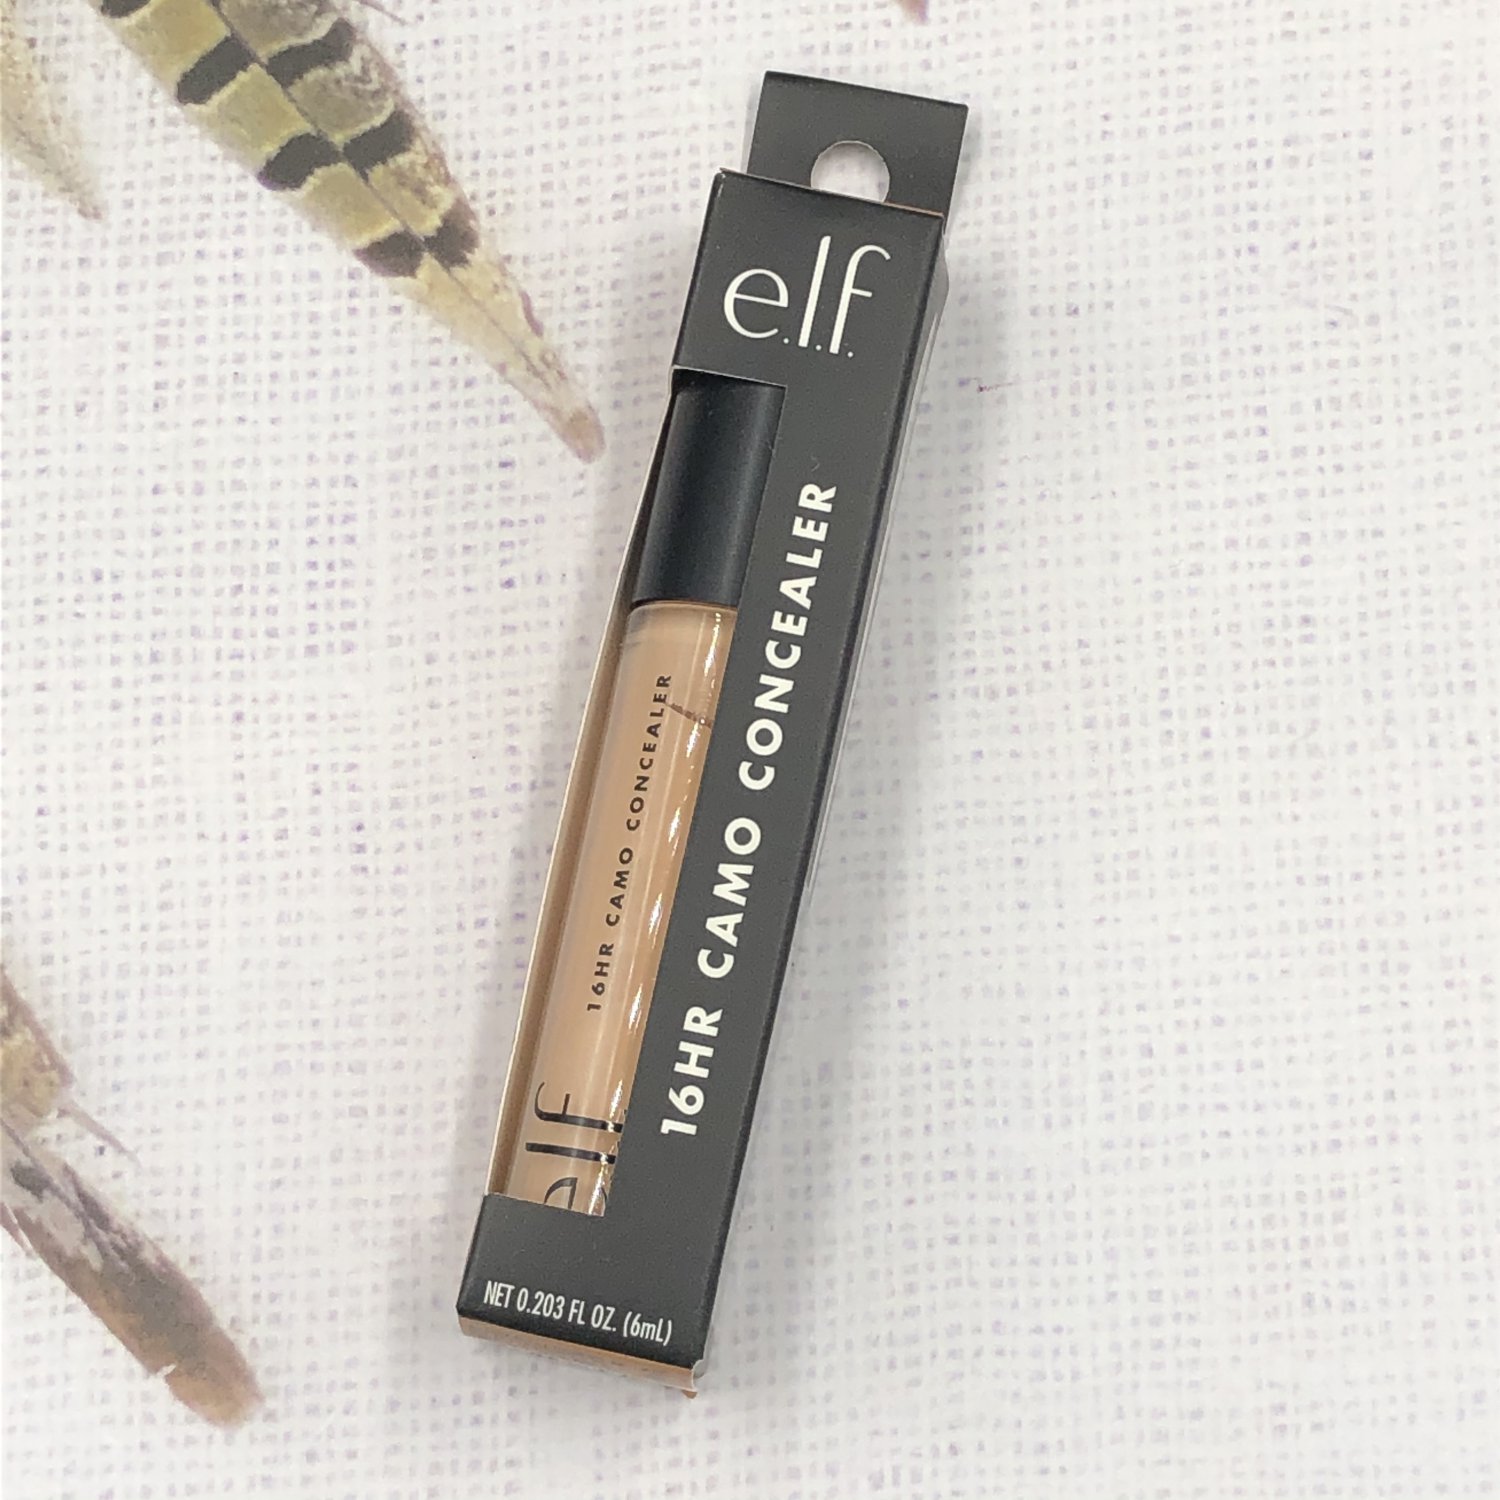 which elf camo concealer matches closest with fair